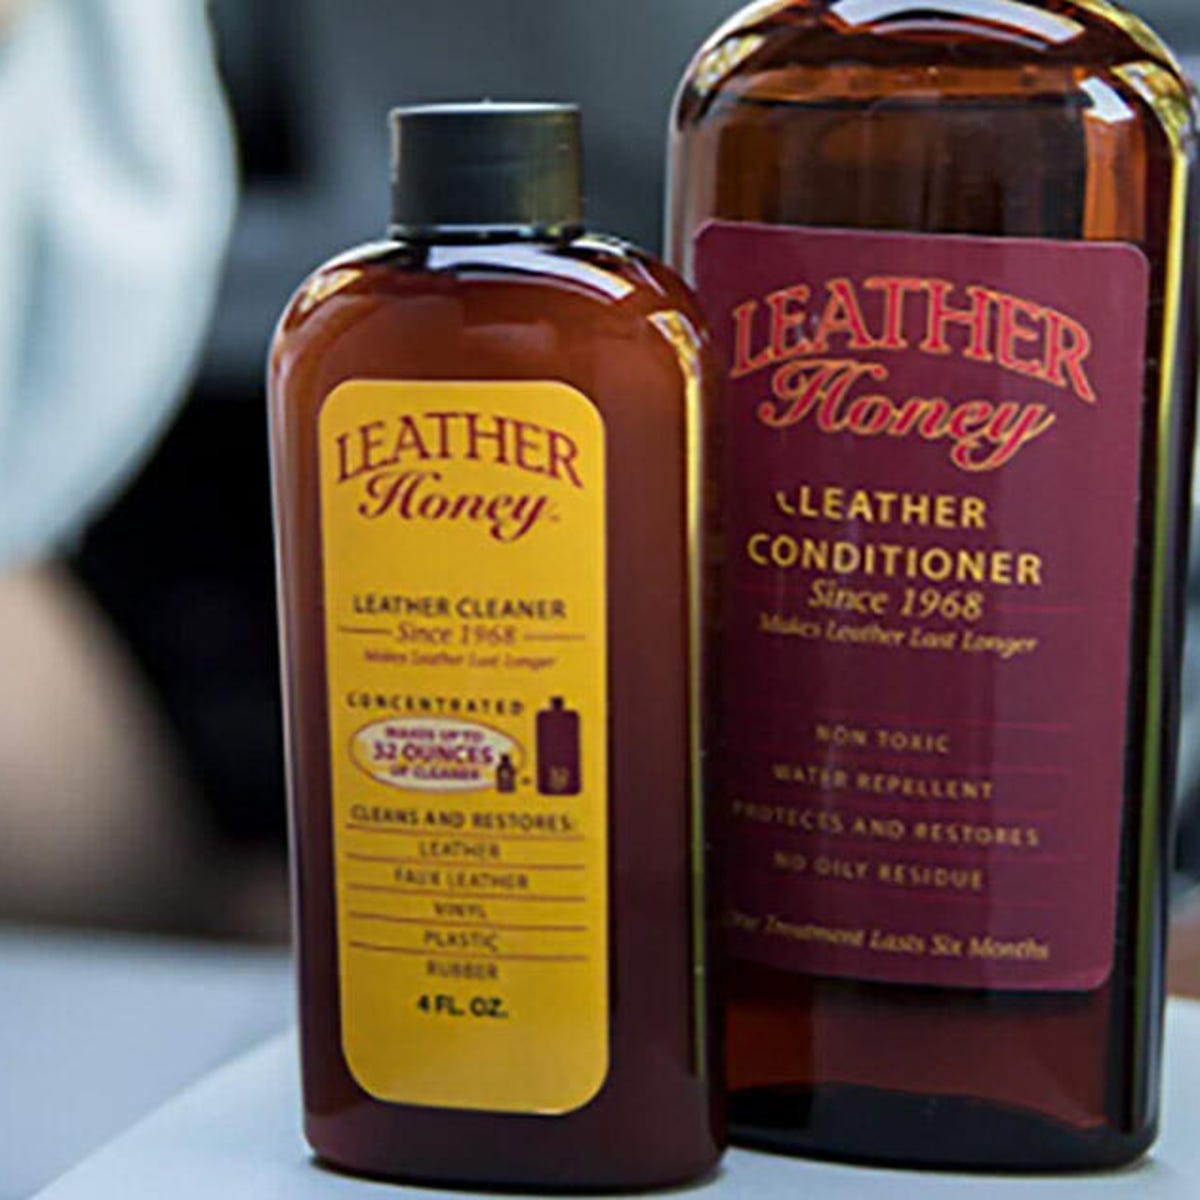 10 Year Old Filthy Leather vs Leather Shampoo 70/30